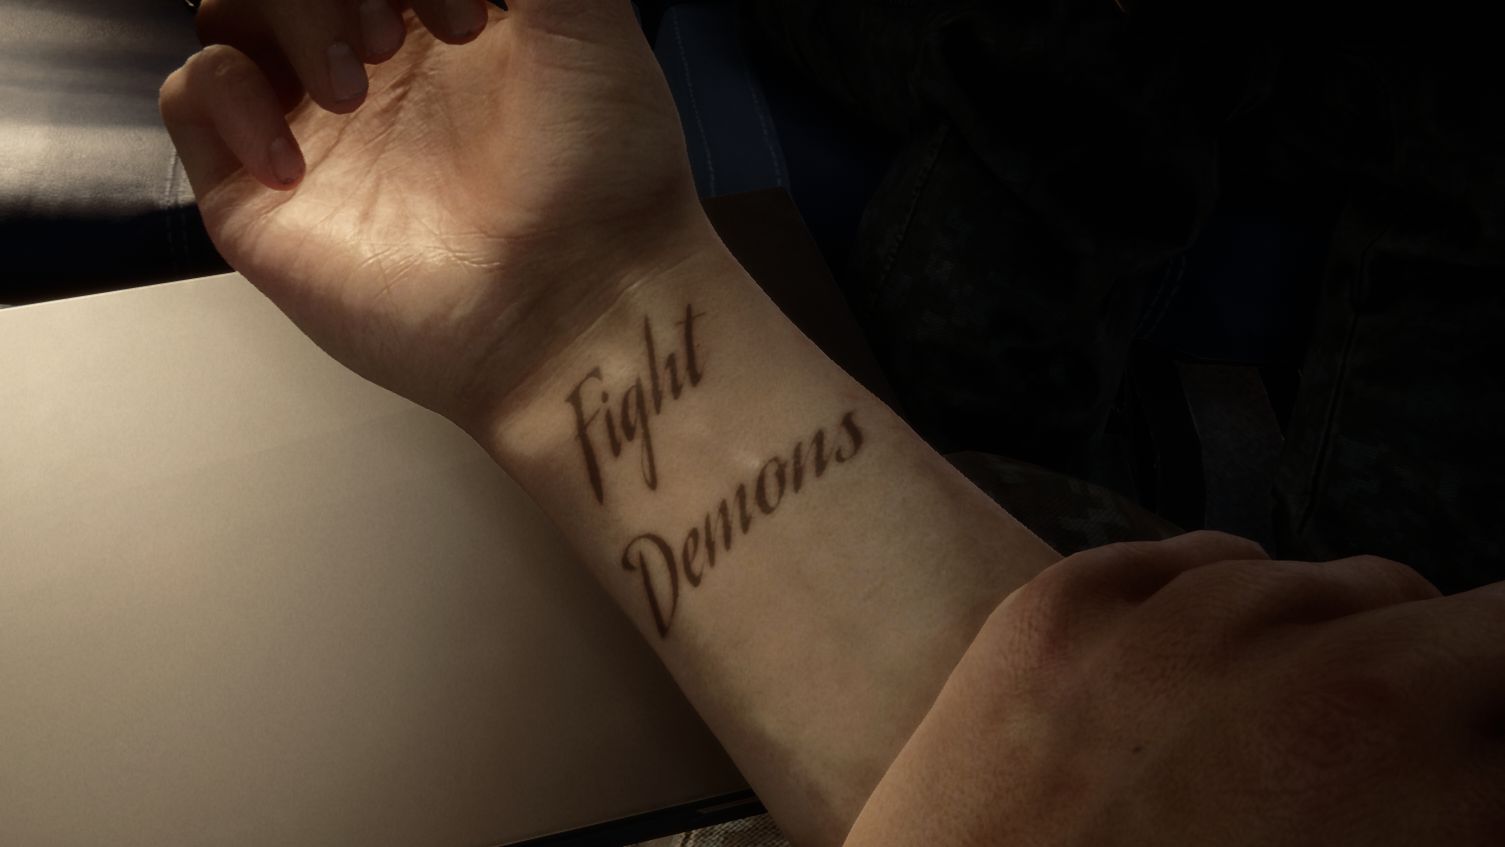 Fight Off Your Demons Temporary Tattoo Sticker  OhMyTat